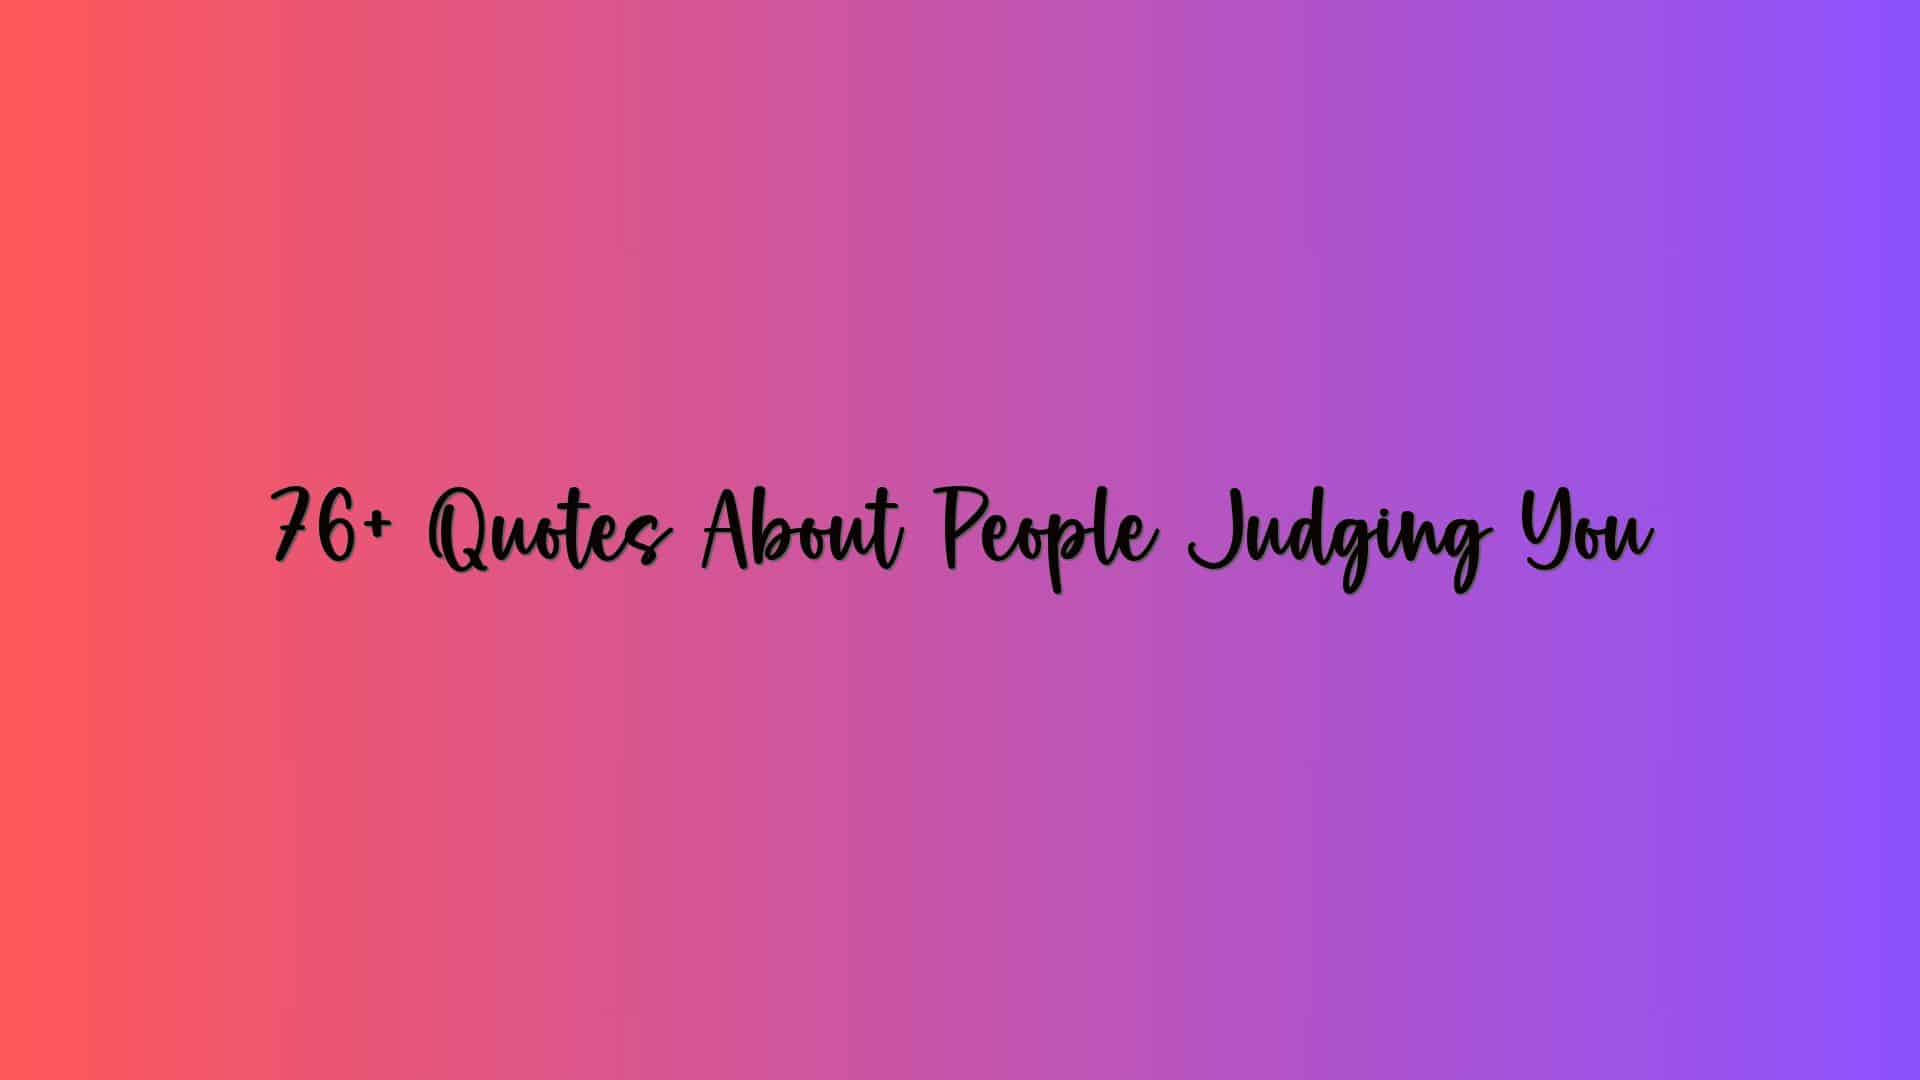 76+ Quotes About People Judging You